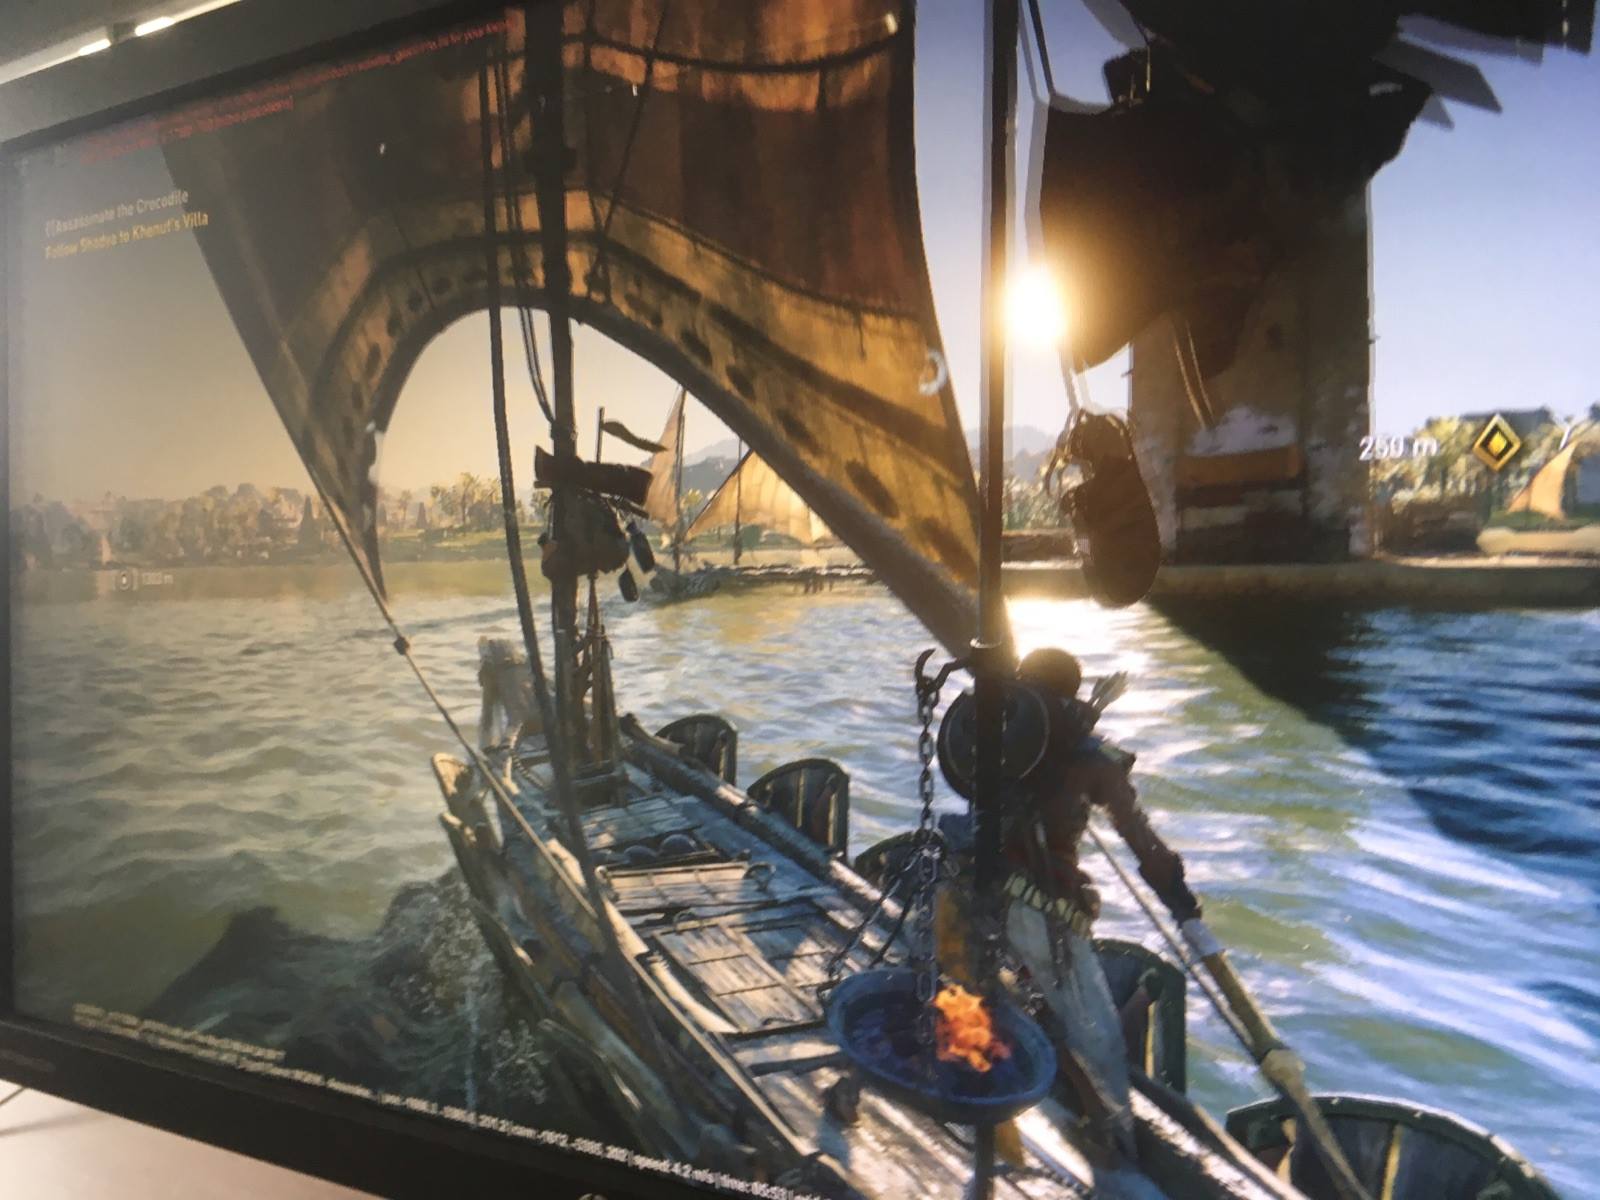 Media asset in full size related to 3dfxzone.it news item entitled as follows: Gi on line uno screenshot del nuovo titolo Assassin's Creed: Origins? | Image Name: news26308_Assassin-s-Creed-Origins-Screenshot_1.jpg